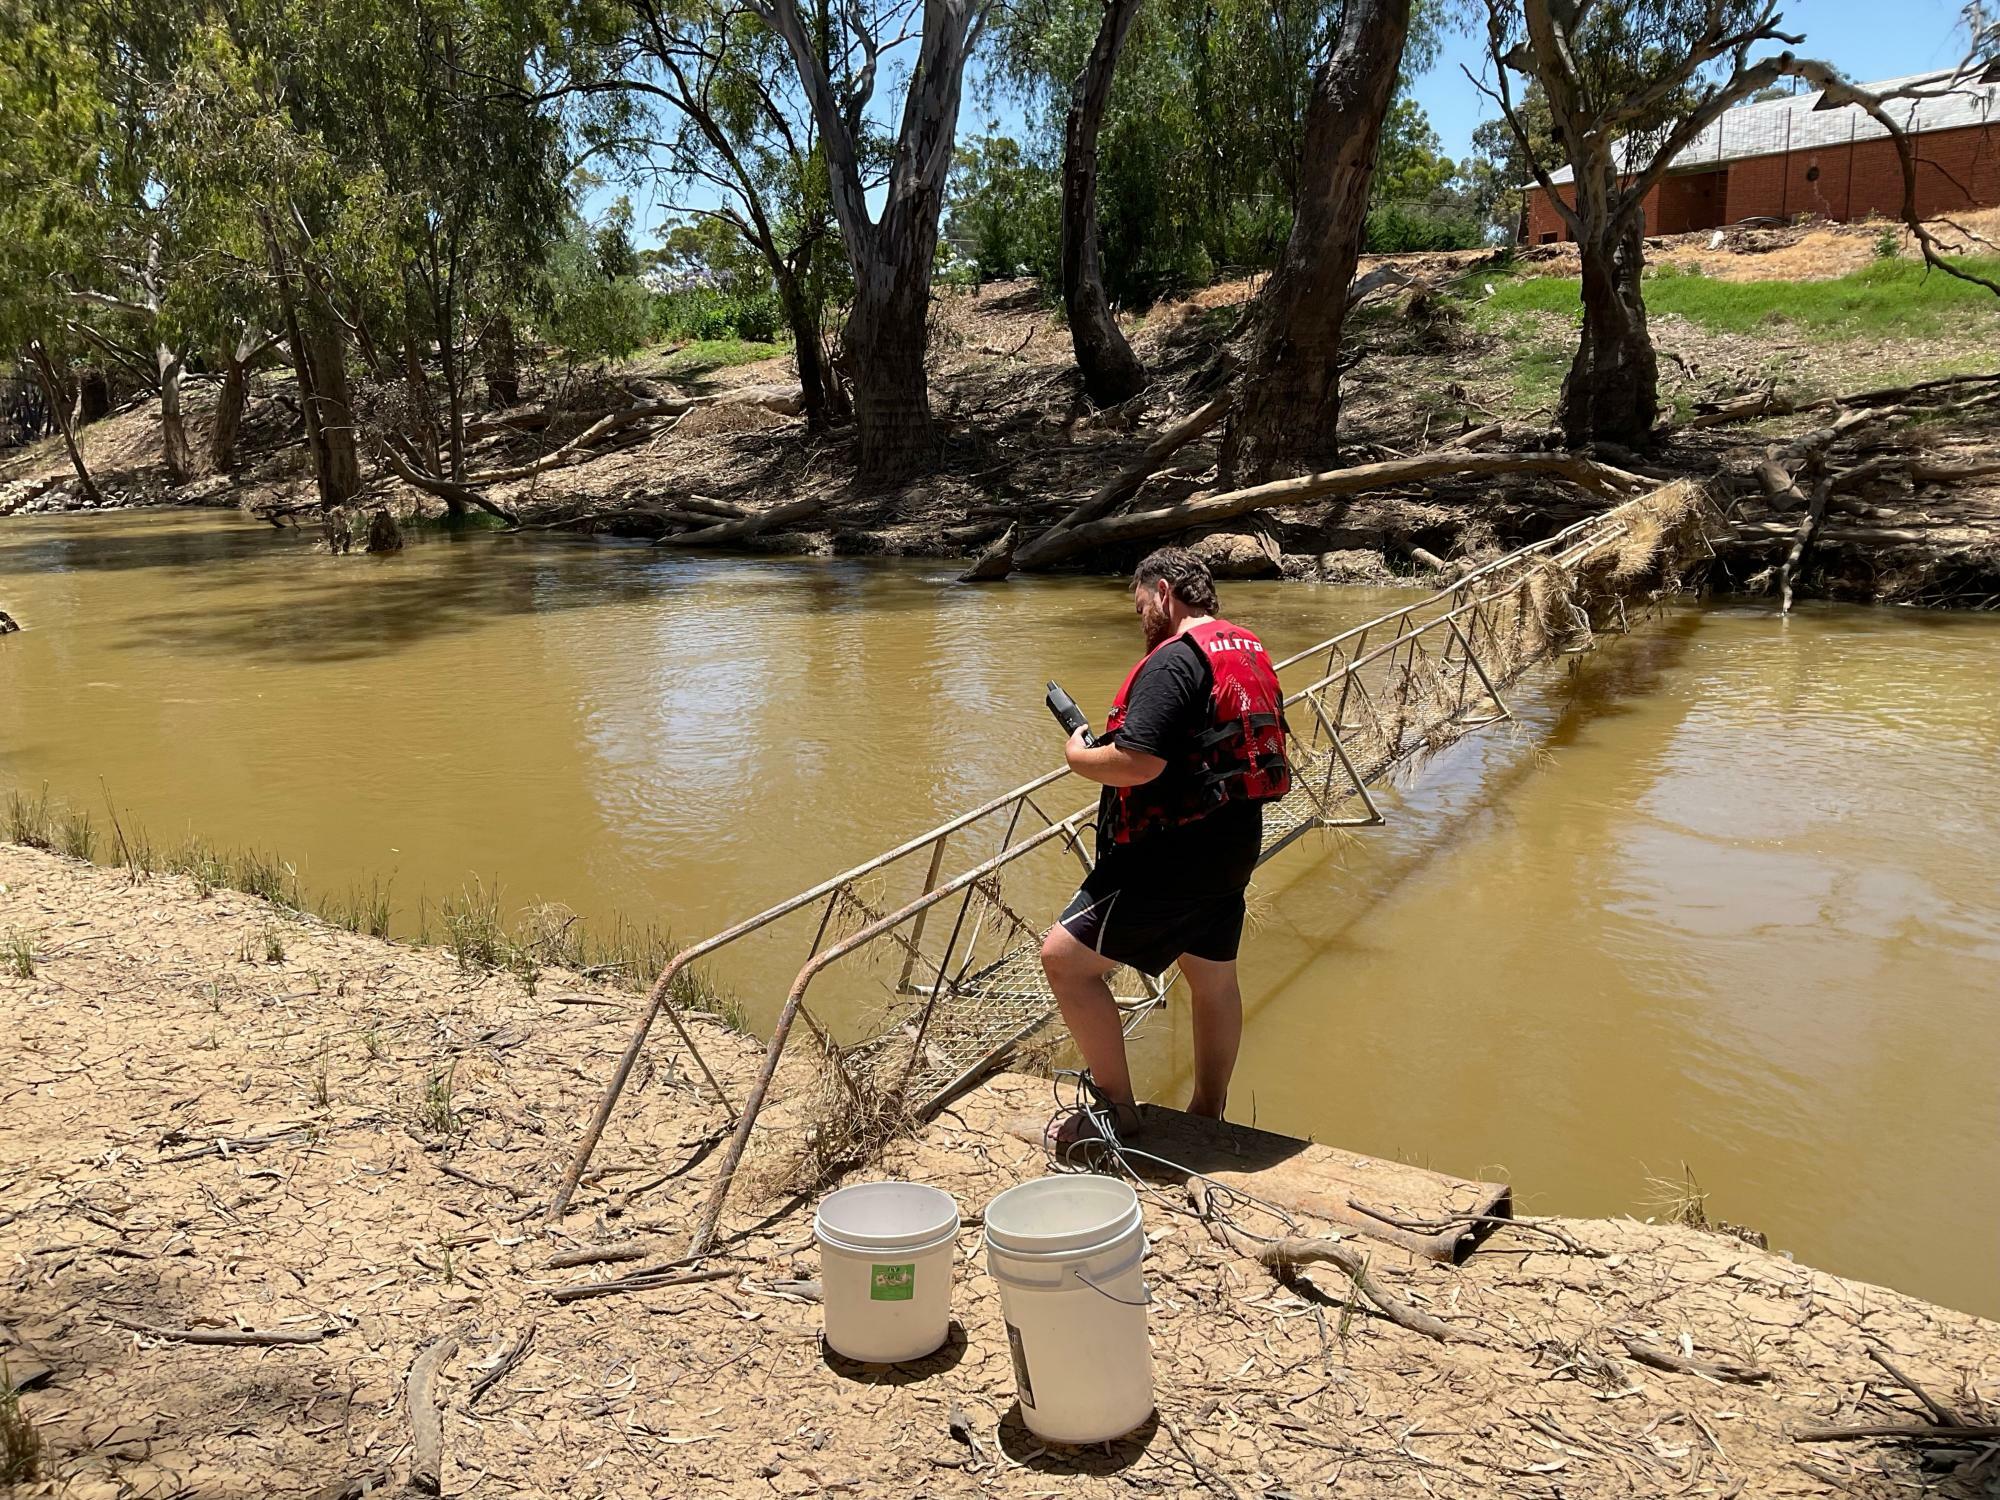 Alec Buckley, from Deniliquin, has been helping his uncle Ant Jones with the water quality monitoring in the Edward/Kolety River. Photo credit, Ant Jones